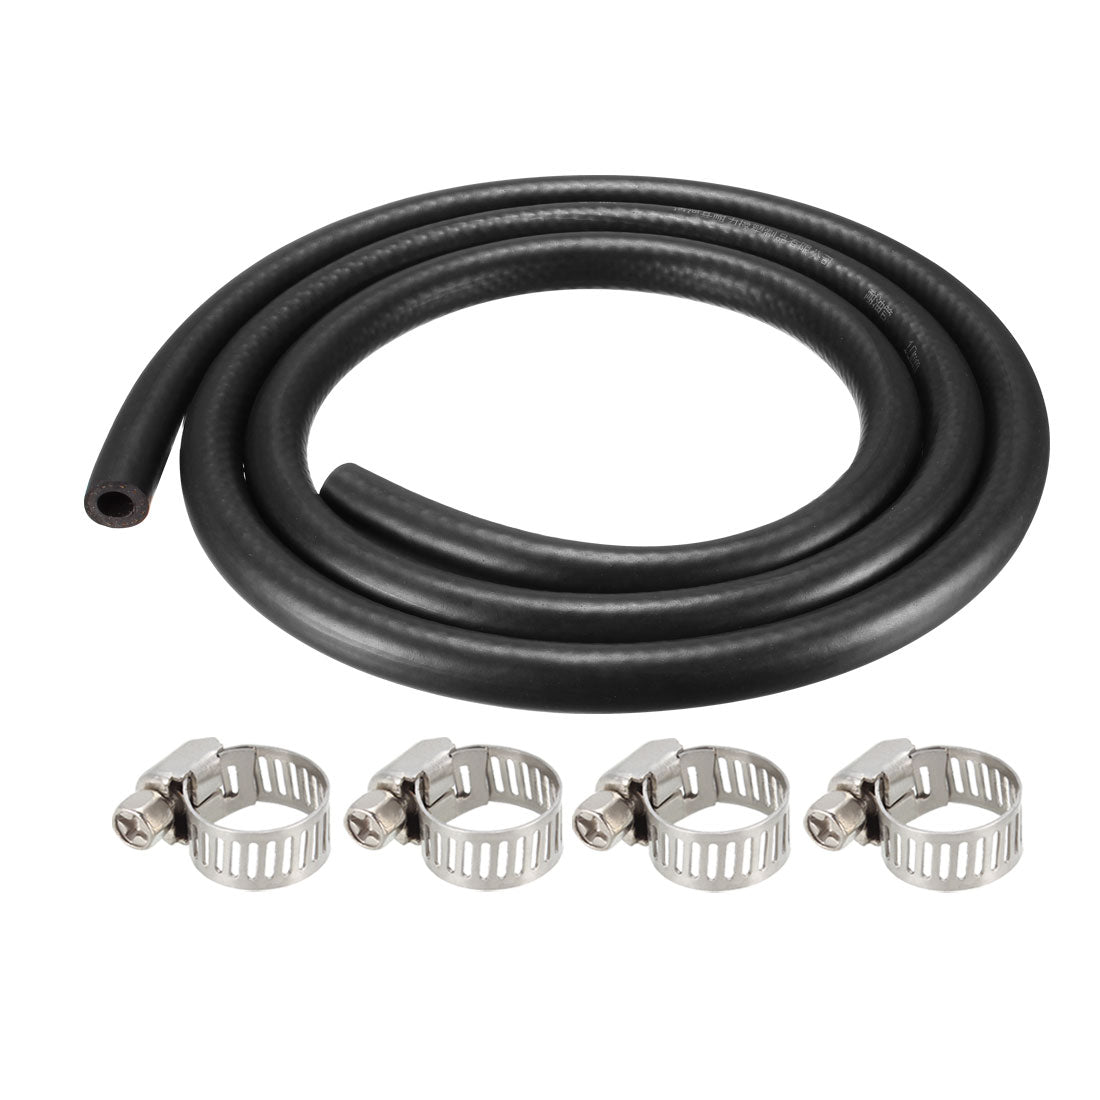 uxcell Uxcell Fuel Line Fuel Hose Rubber  10mm I.D.  1.8M/5.9FT  Diesel Petrol Hose Engine Pipe Tubing with 4 Clamps